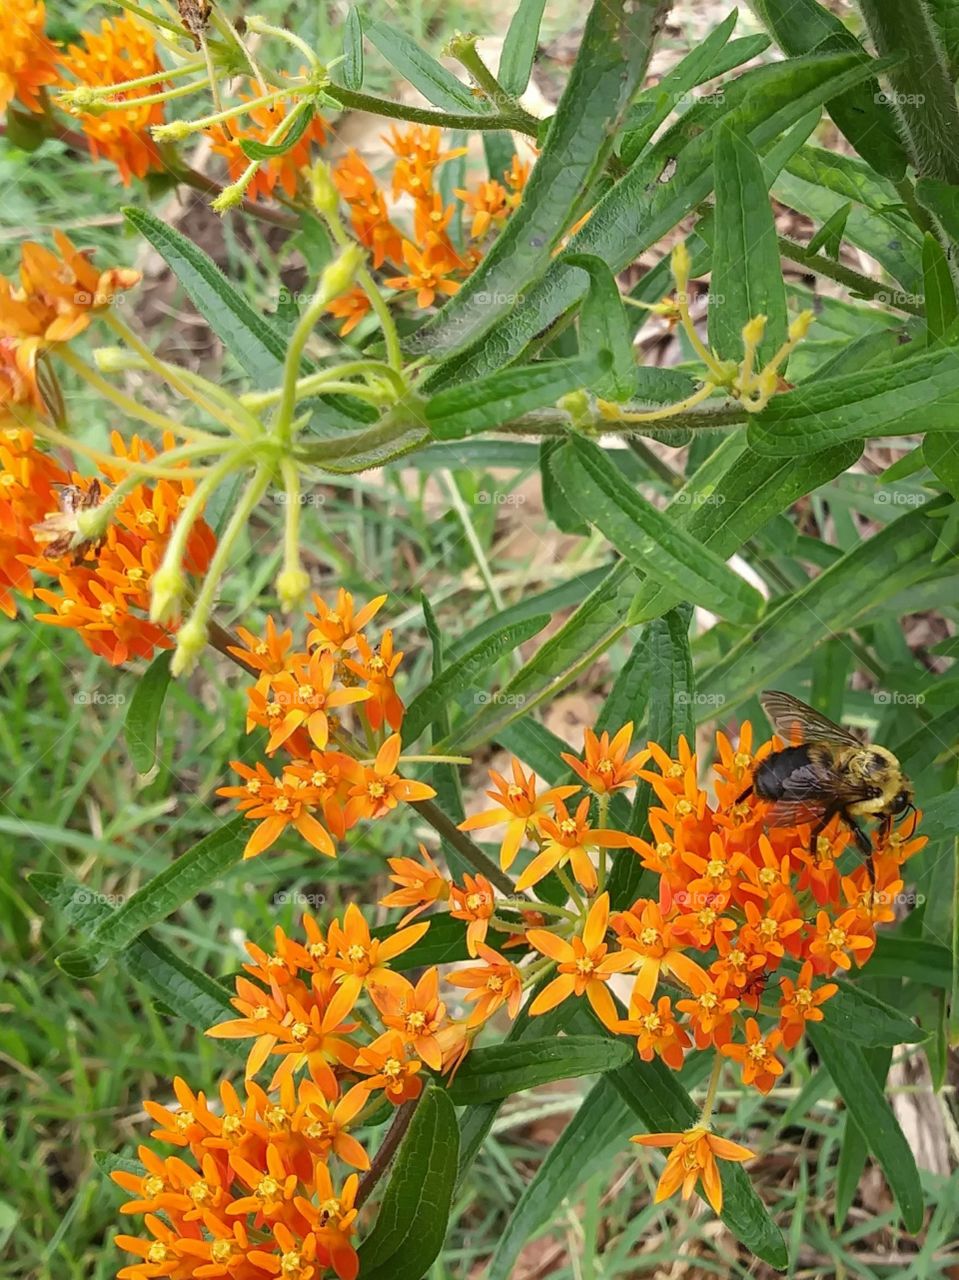 A fat bumble bee enjoying some afternoon pollen from tiny, beautiful, orange flowers in a park, in Marshfield, MO.